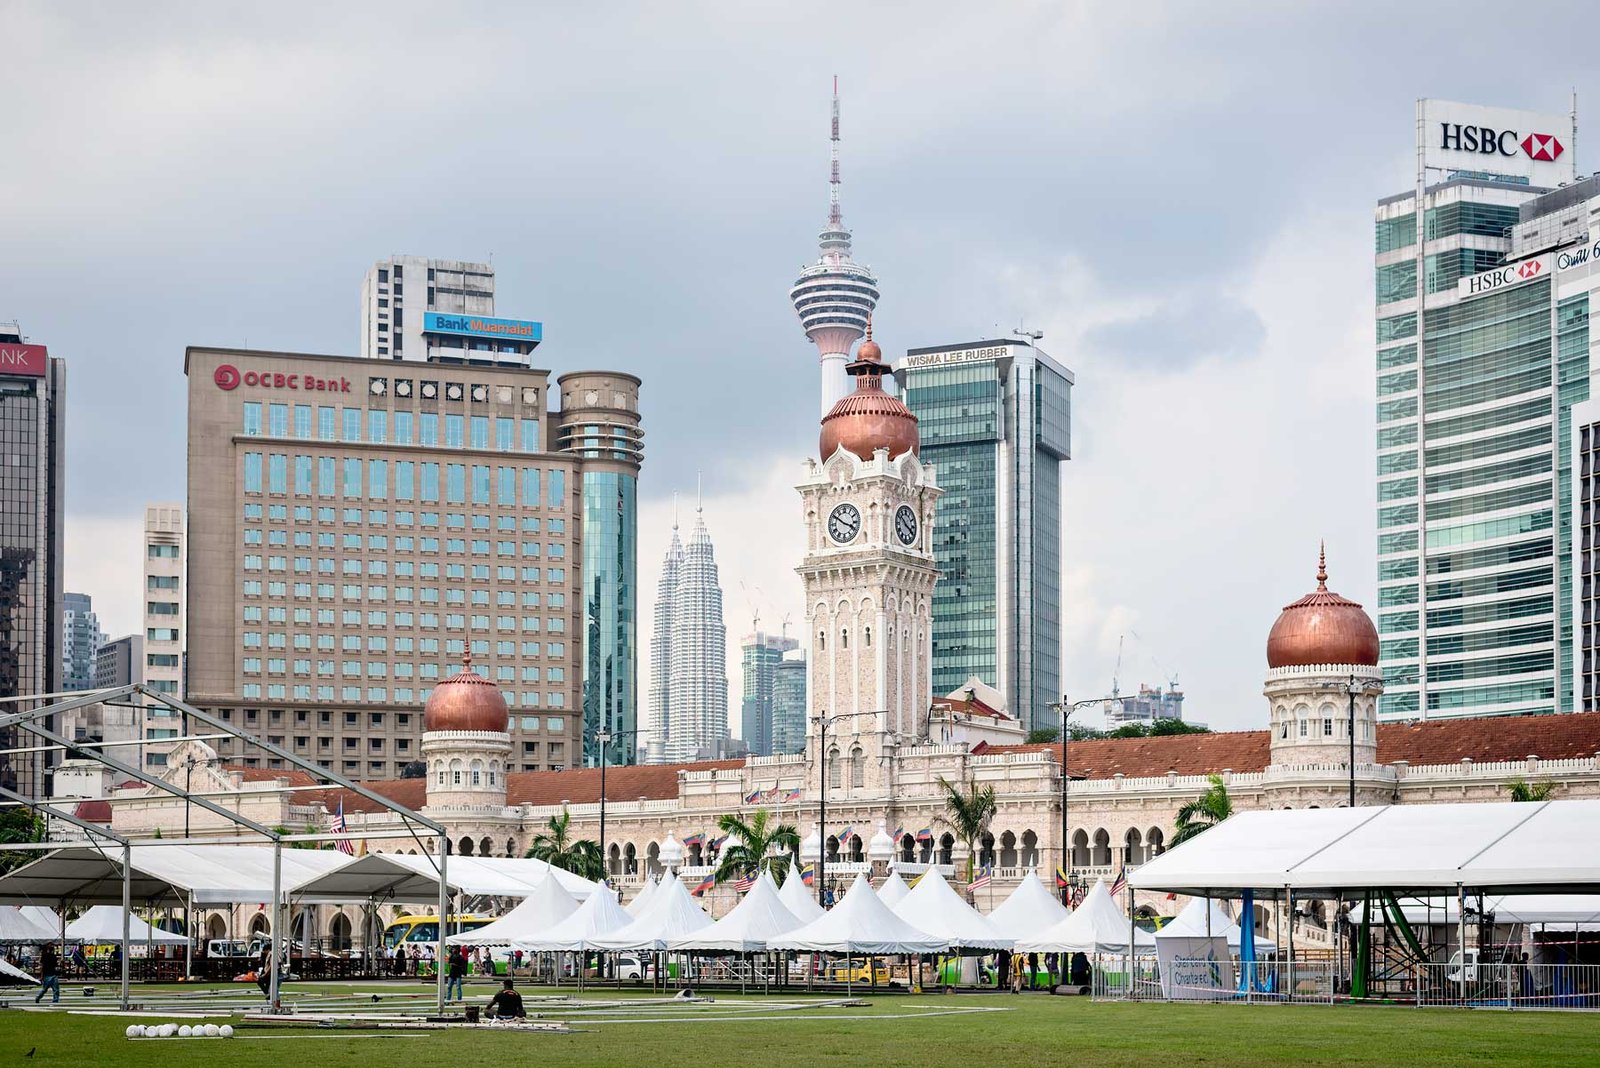 How to spend 3 amazing days in Kuala Lumpur, Malaysia - Merdeka Square with Sultan Abdul Samad Building